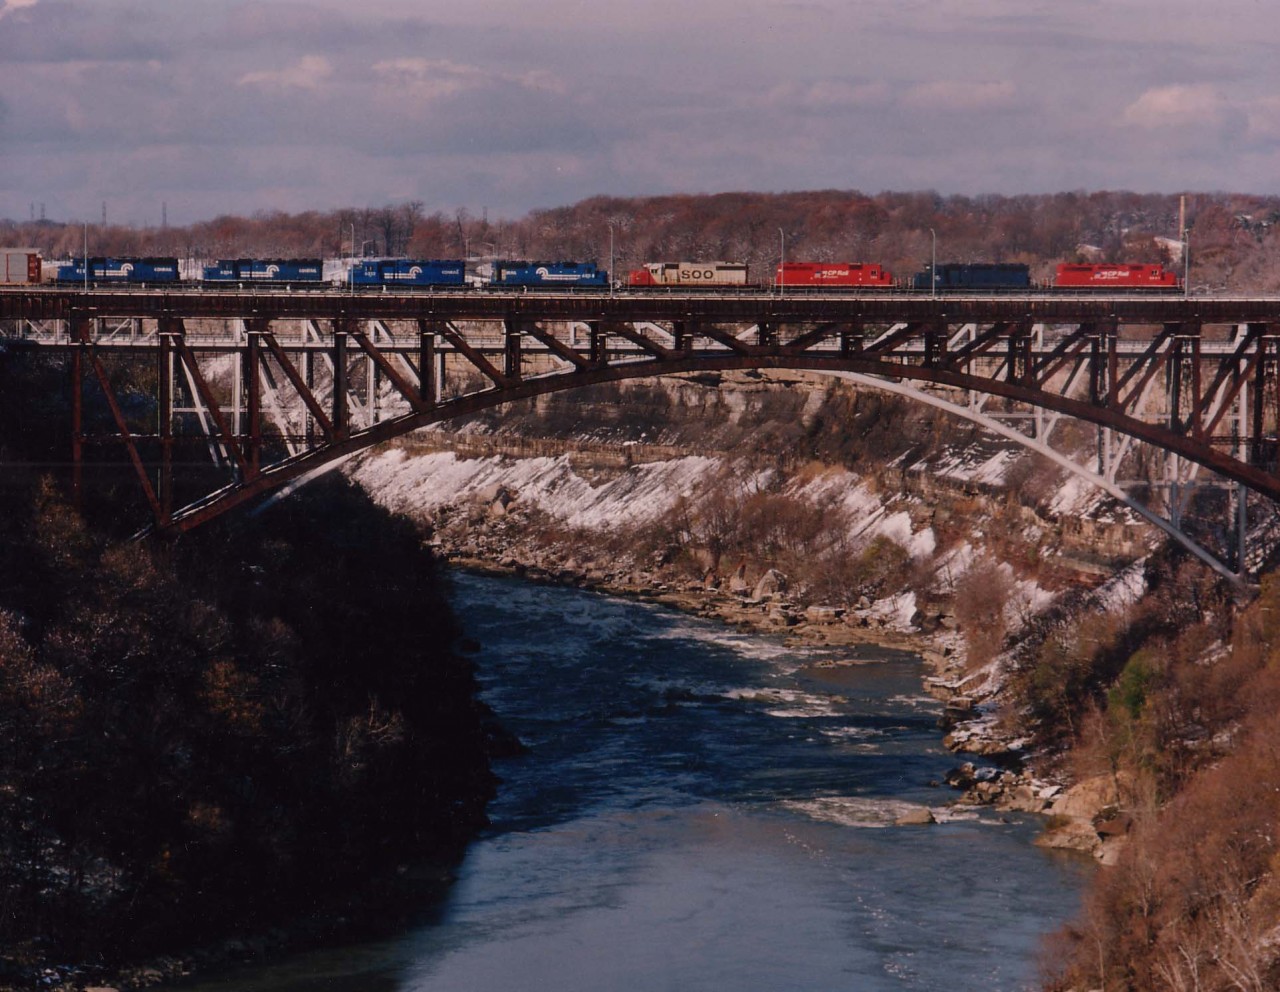  A.W.Mooney Photo: Shown here is the CP train #734 heading  over the Niagara River via the old Suspension Bridge, now just a hulk too  expensive to dismantle after the CP's